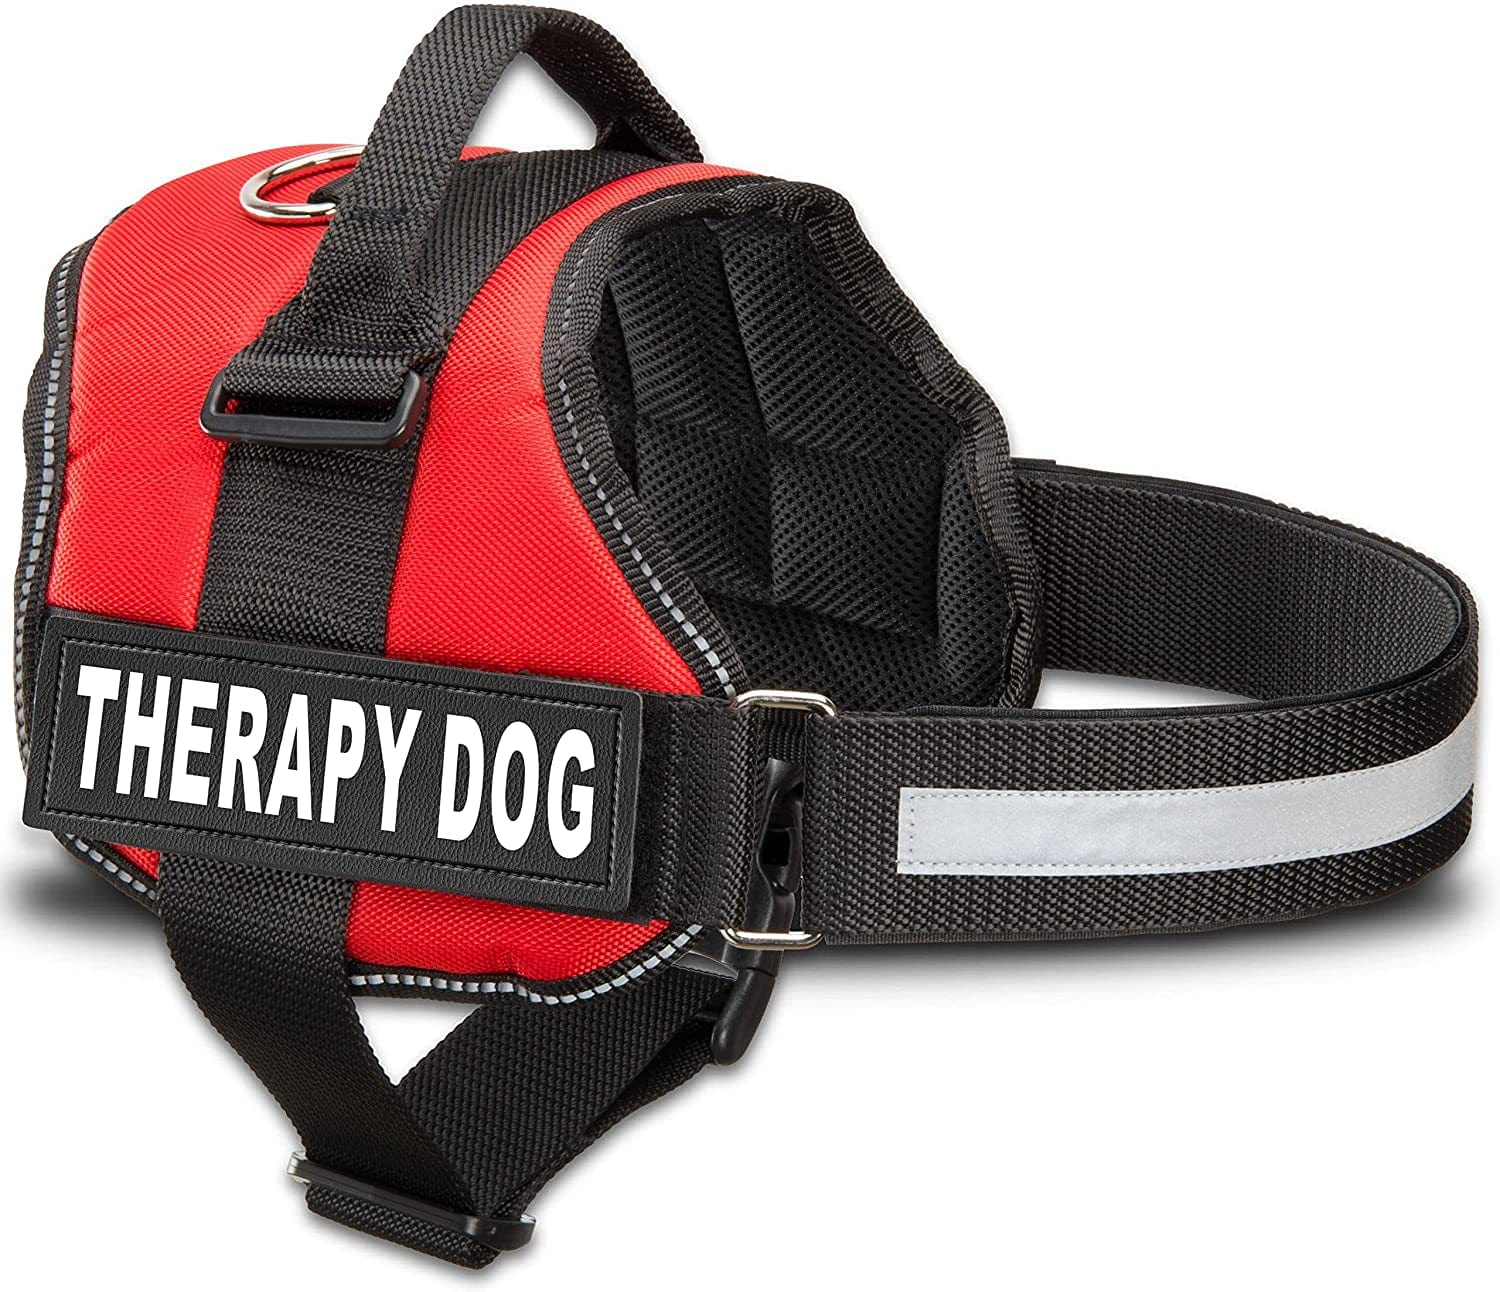 Therapy Dog Vest Harness with Hook and Loop Straps and Handle - Harnesses in 7 Sizes from XXS to XXL - Therapy Dog in Training Vest Features Reflective Therapy Dog Patch Animals & Pet Supplies > Pet Supplies > Dog Supplies > Dog Apparel Industrial Puppy Red Small, Fits Girth 21-26" 